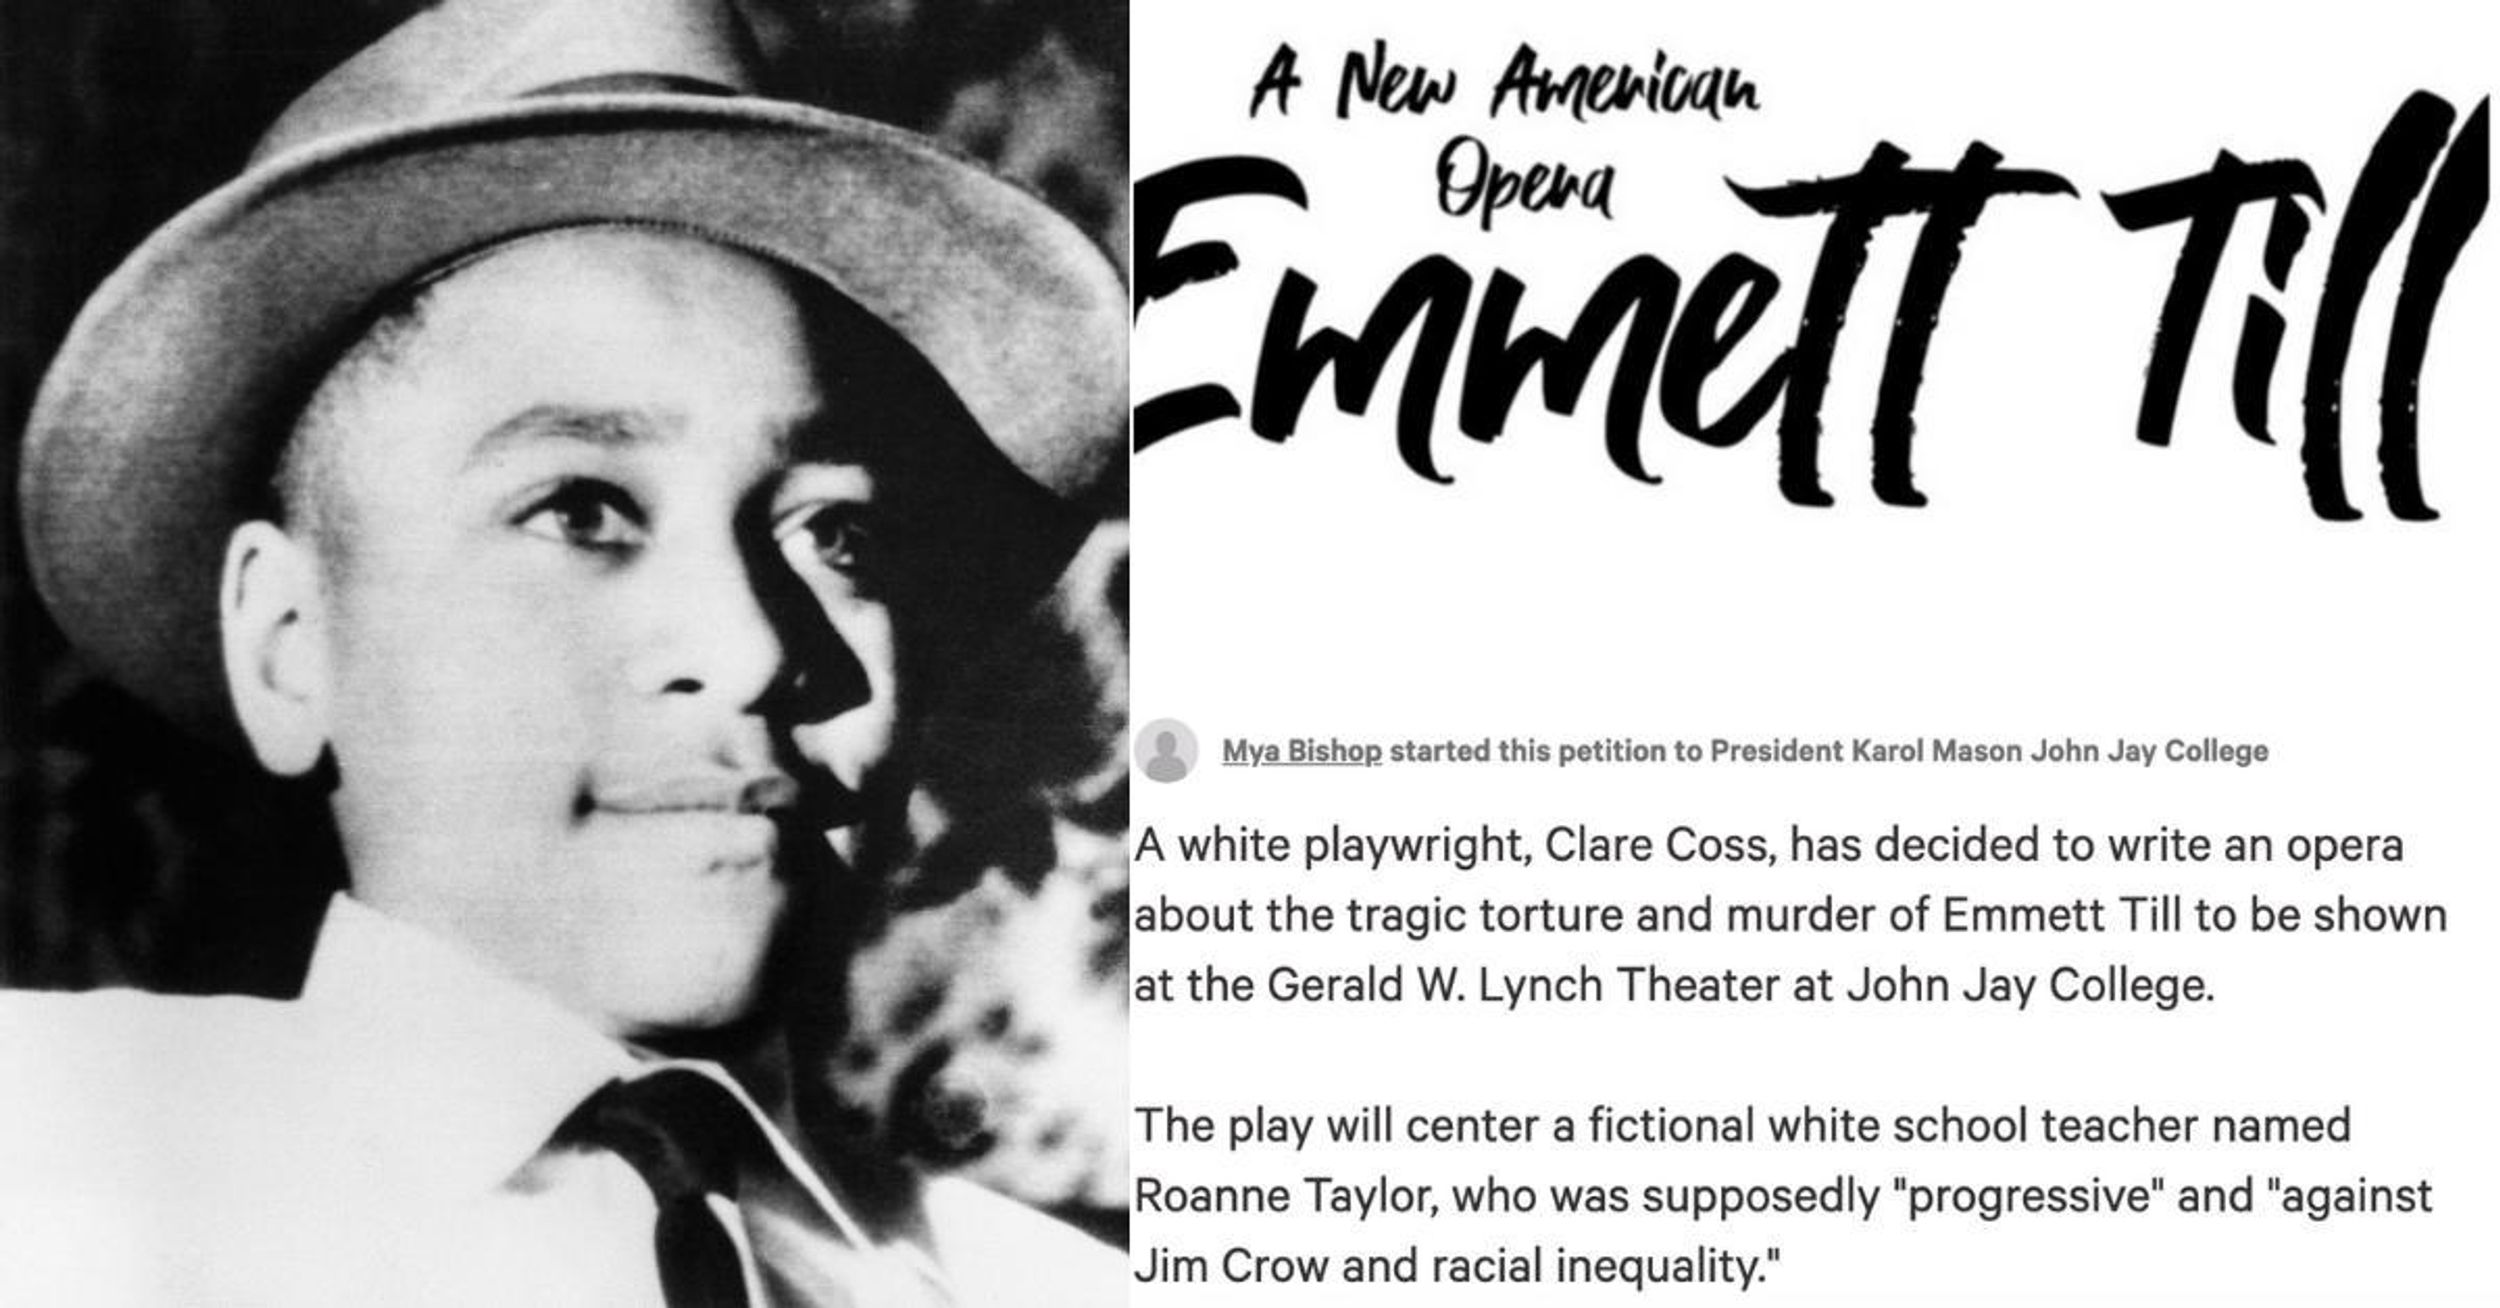 Over 13k People Sign Petition To Cancel Emmett Till Opera That Centers Around Fictional White Character